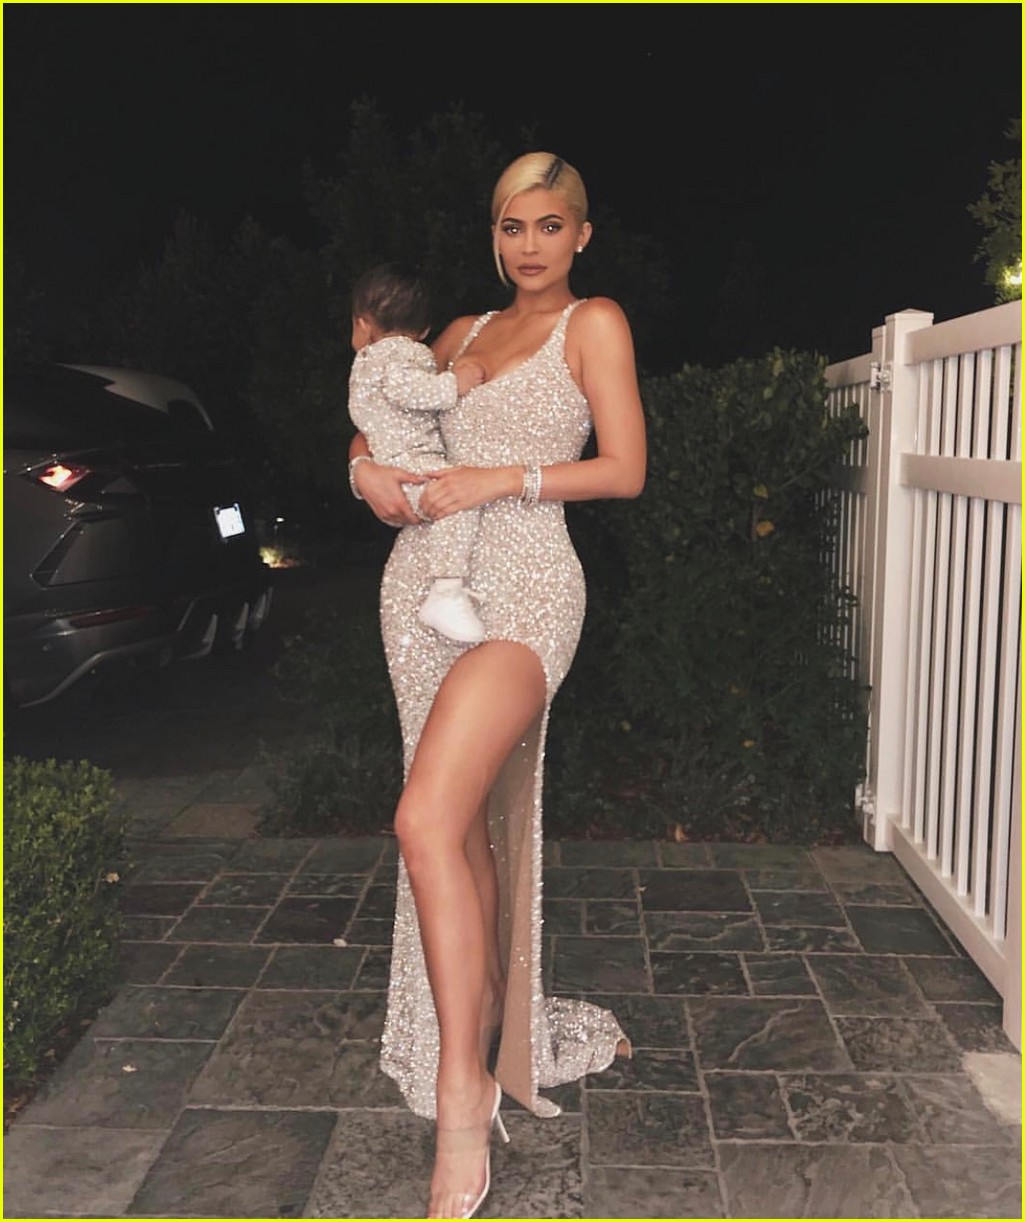 kylie jenner christmas eve party stormi webster 04